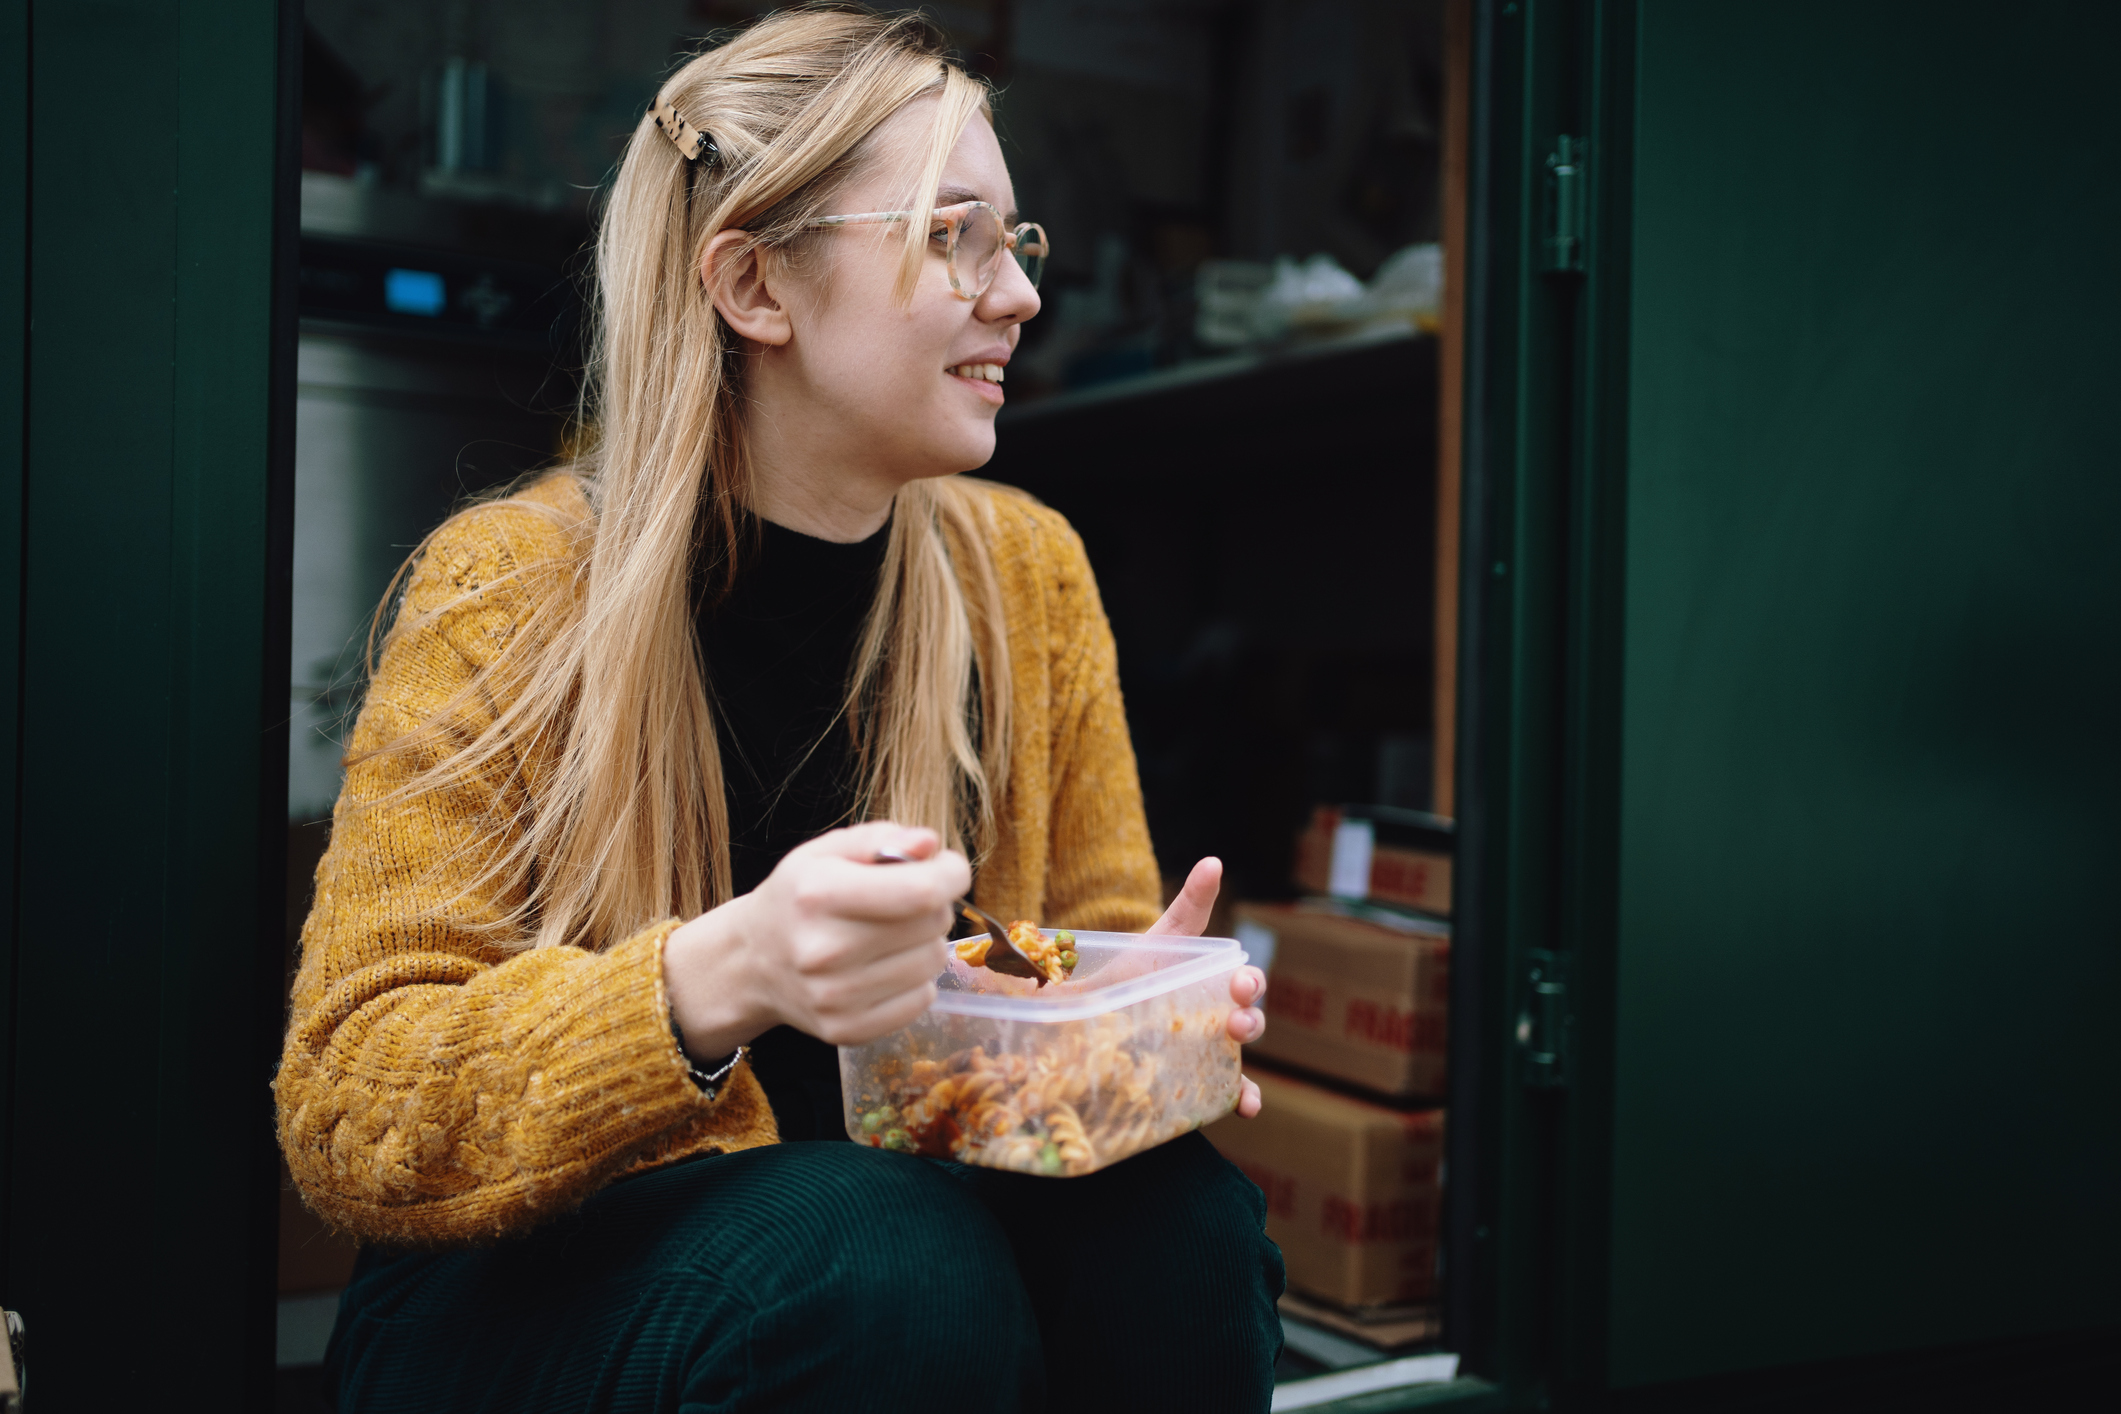 Woman with long blonde hair and glasses sat outside on step eating lunch from a lunchbox / Female Focus Collection